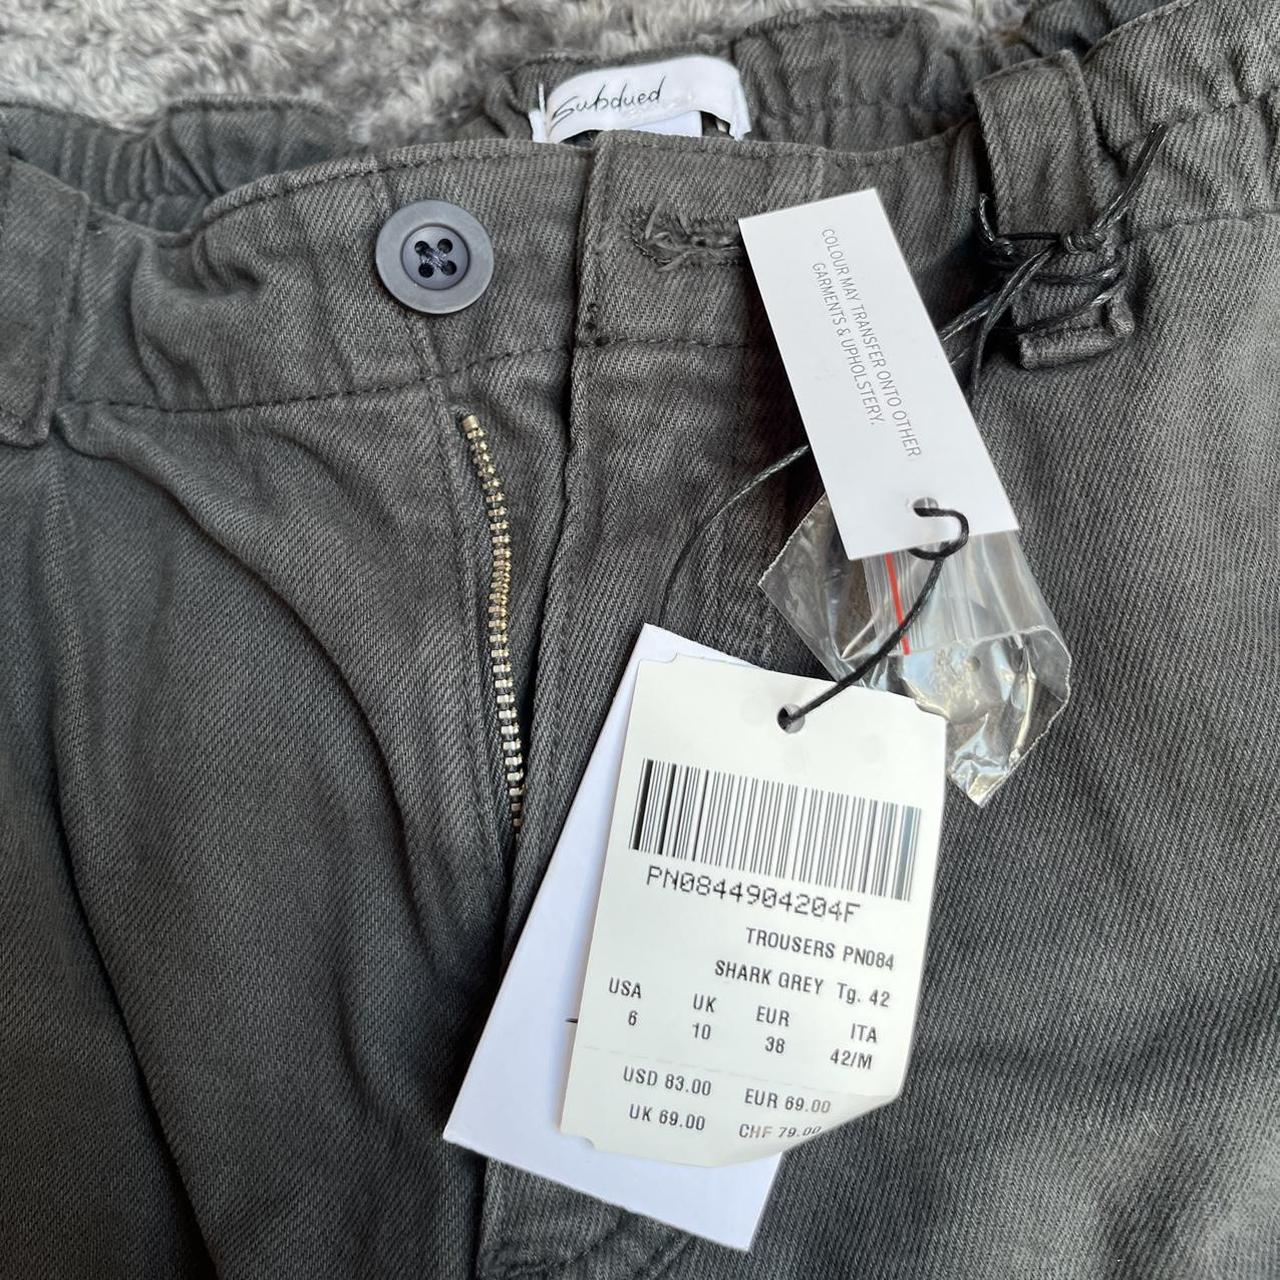 Subdued cargo trousers brand new never worn Bought - Depop